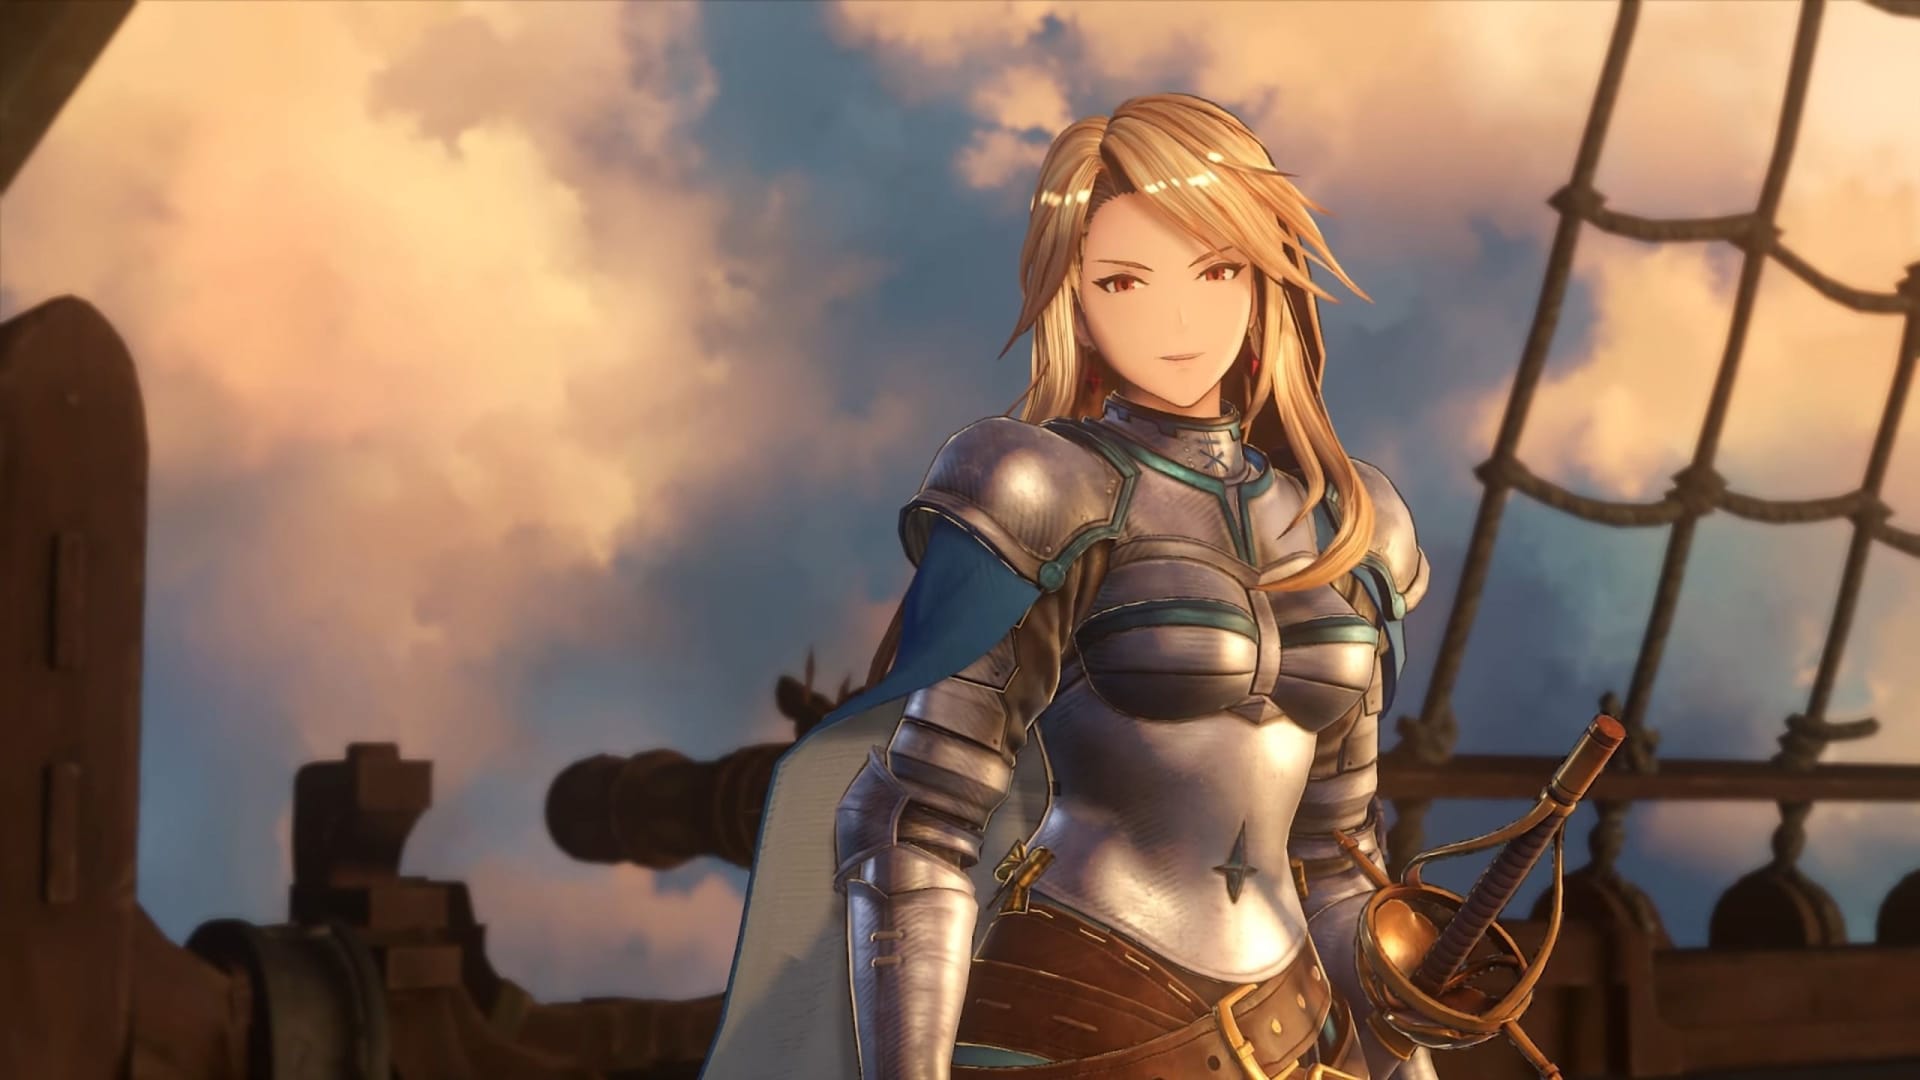 Buy Granblue Fantasy: Relink Other